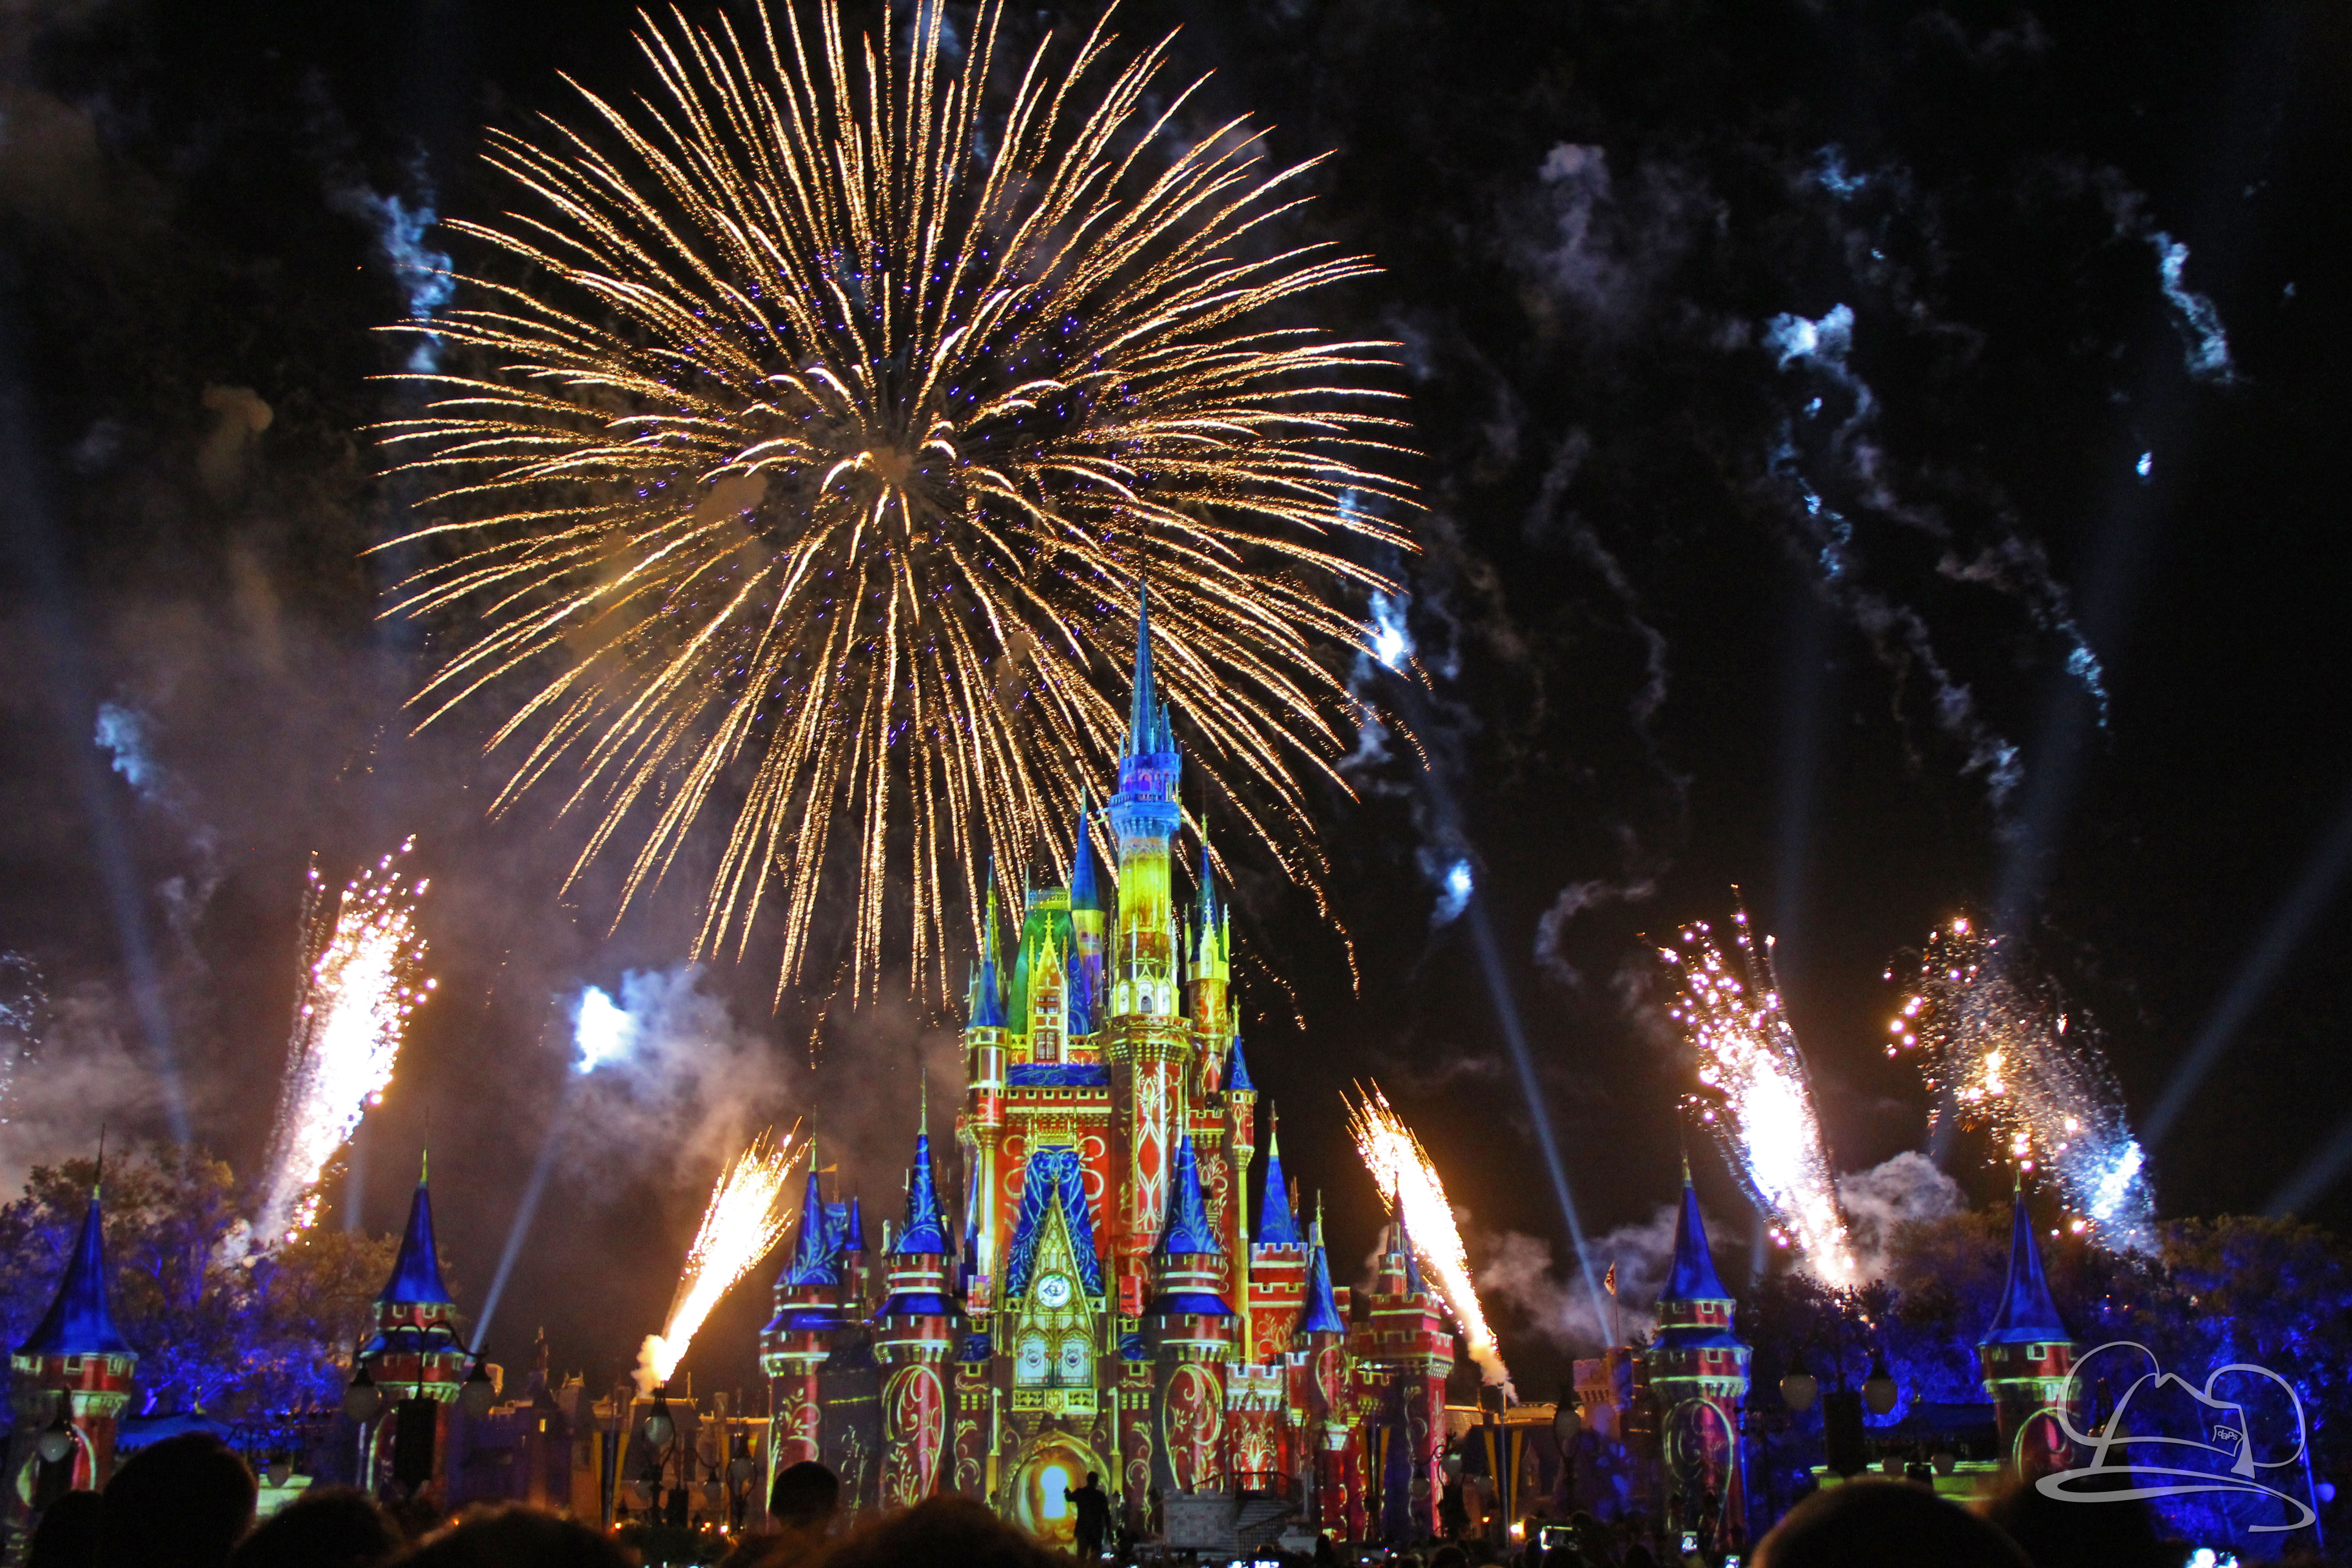 Happily Ever After Fireworks at the Magic Kingdom in the Walt Disney World Resort